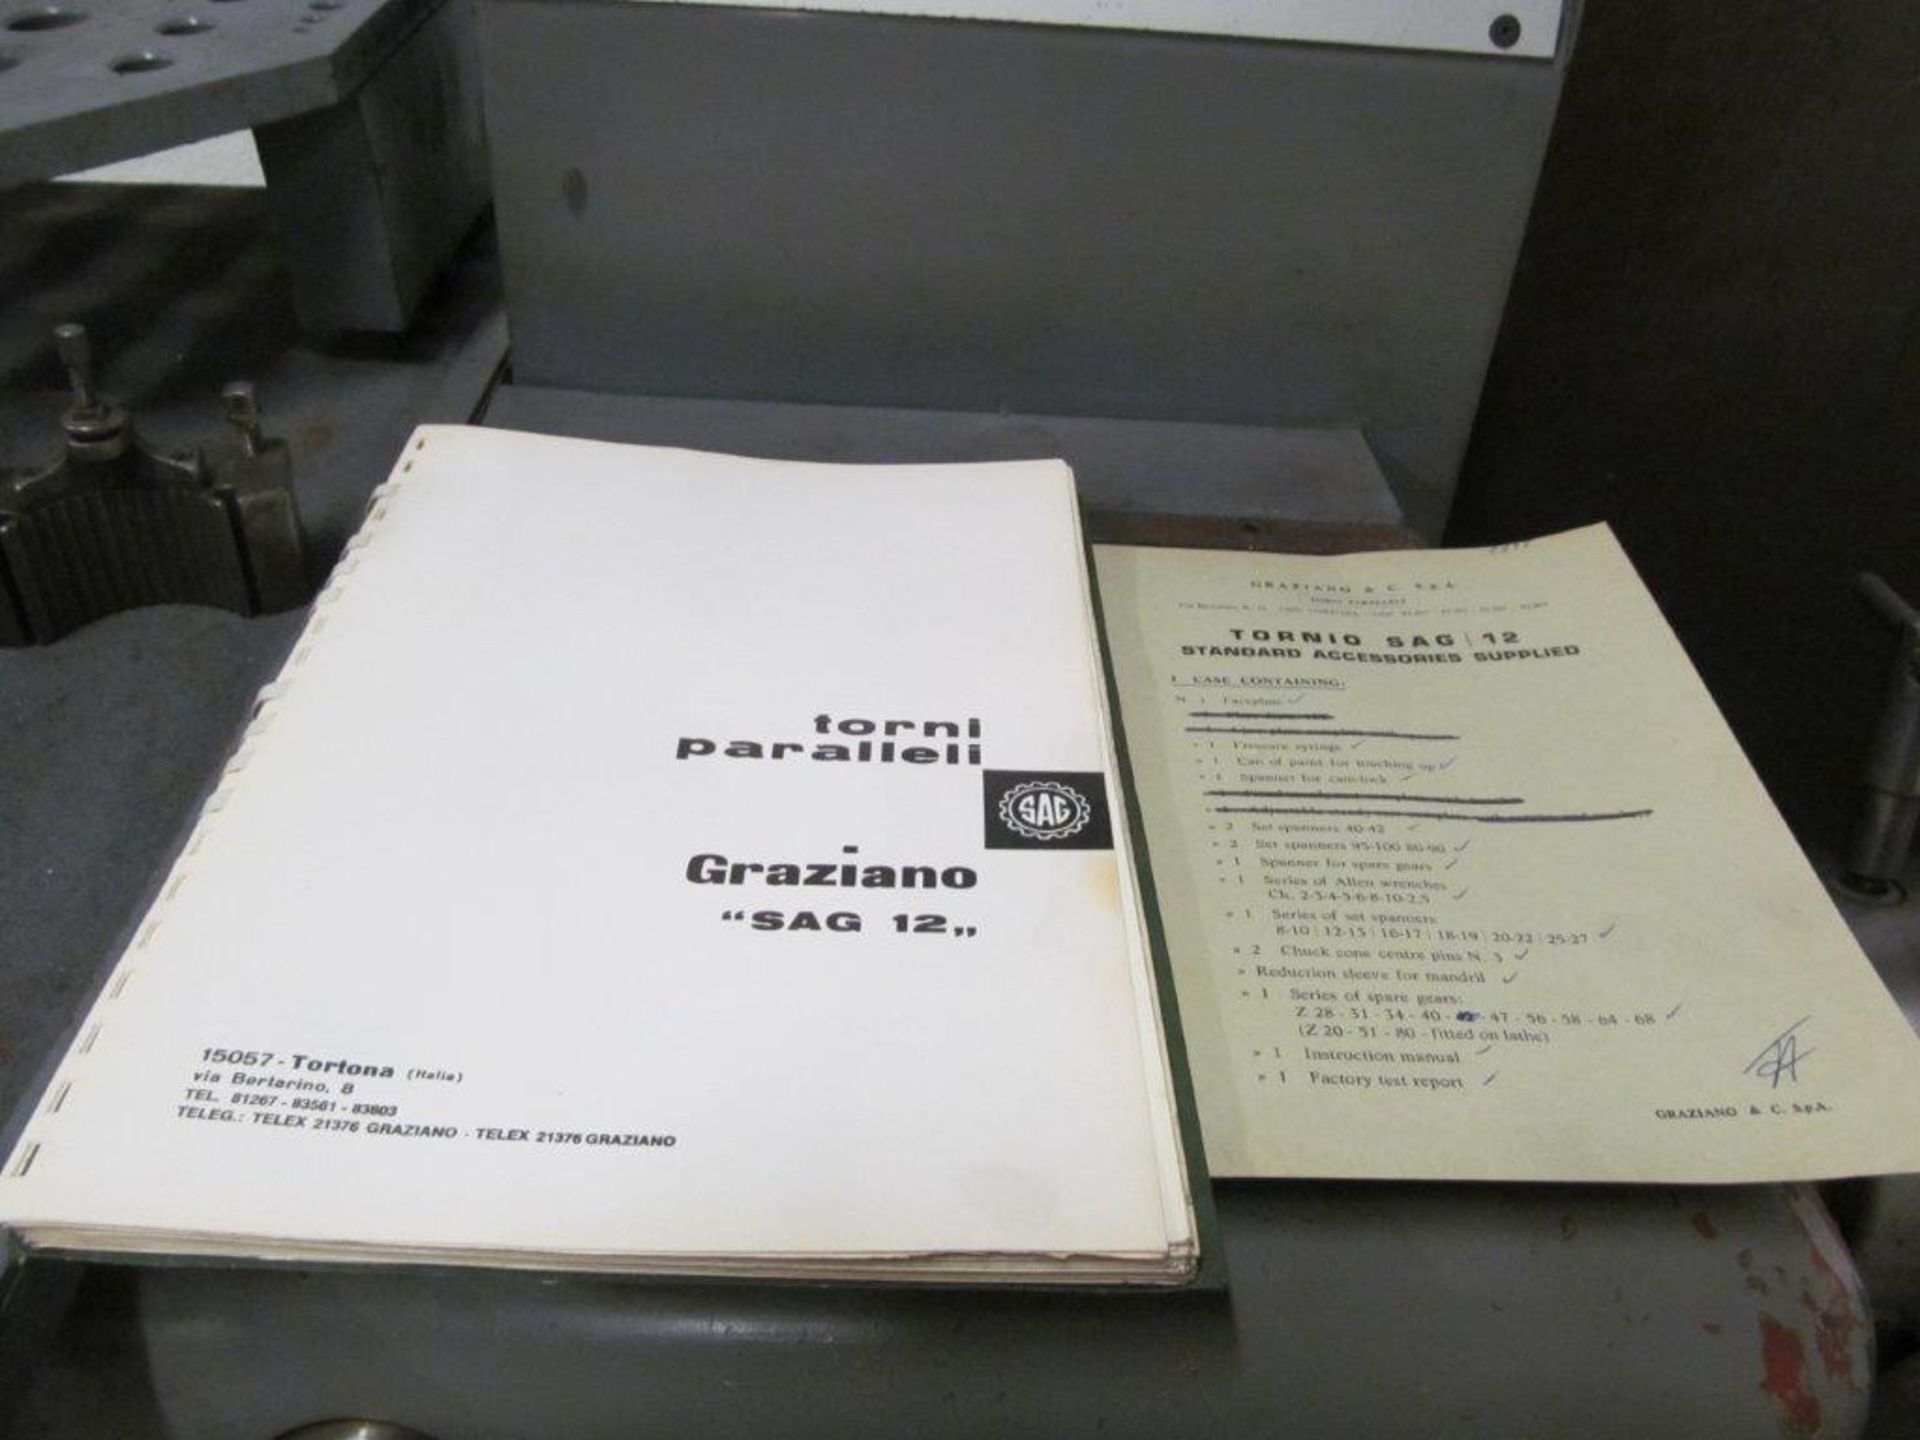 GRAZIANO ENGINE LATHE MODEL SAG 12, 14-1/2" SWING X 30" CENTERS, C/W ACCOMPANYING ACCESSORIES, - Image 8 of 8